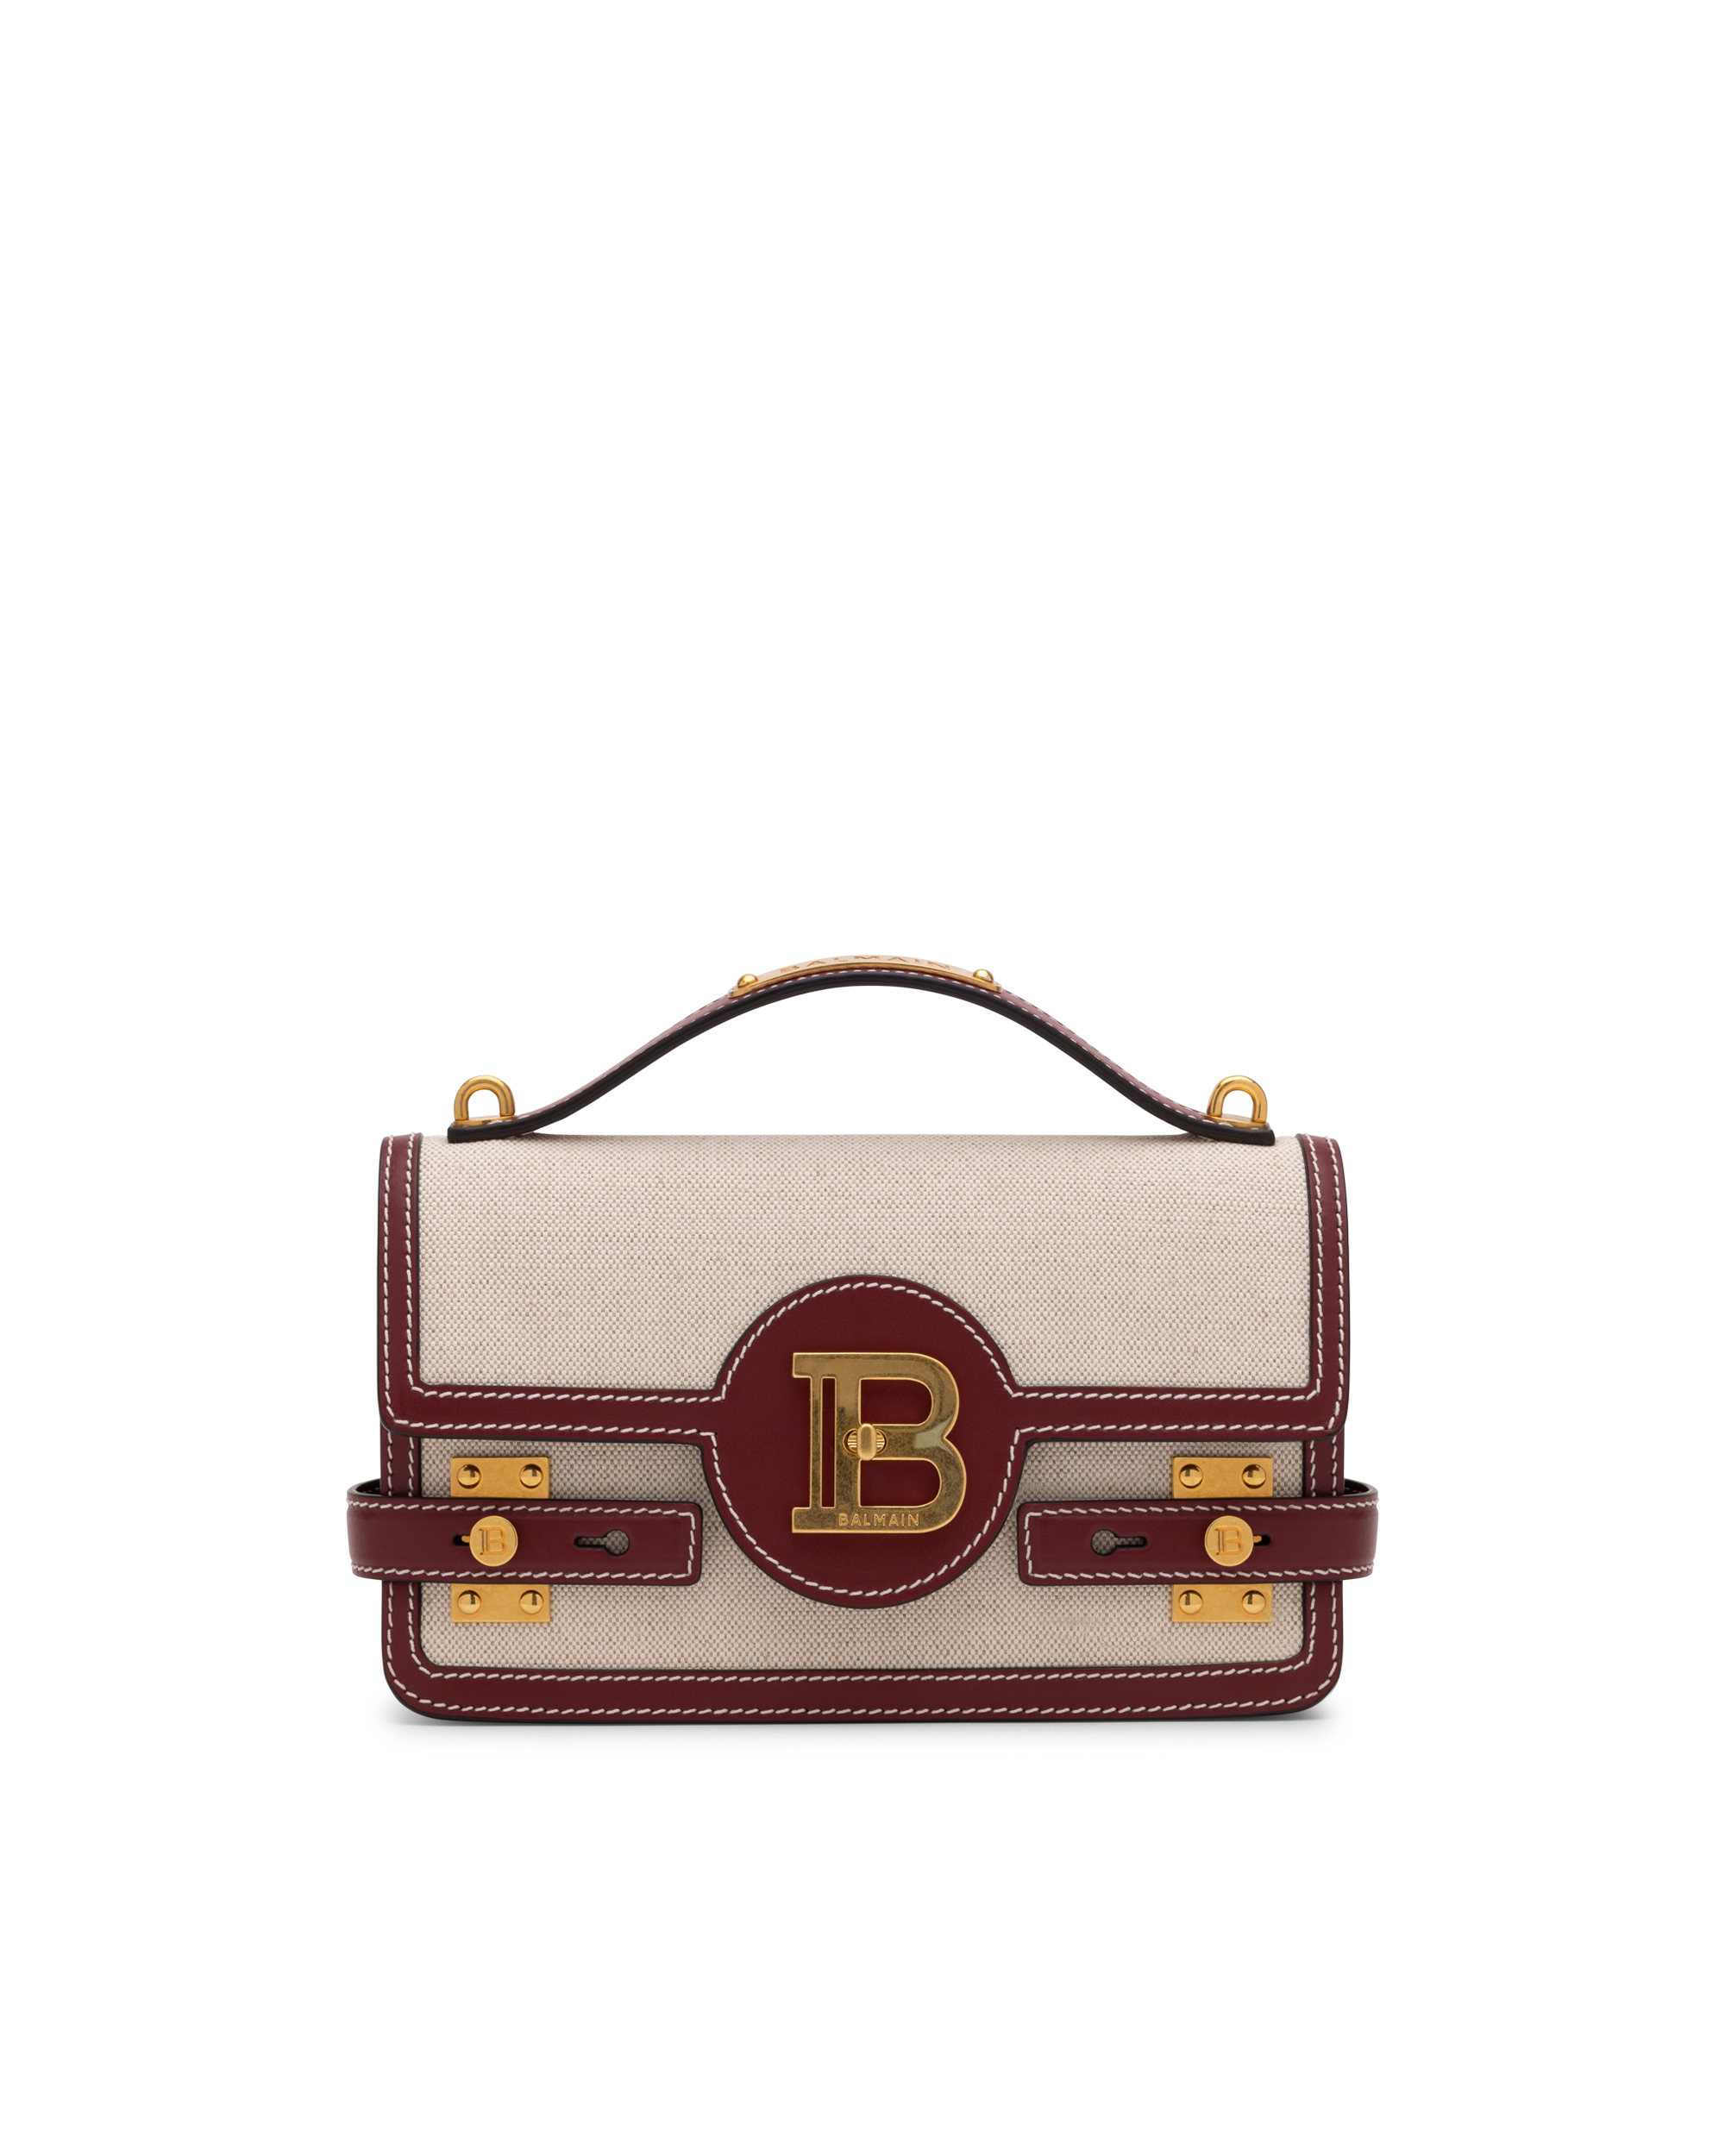 B-Buzz 24 Canvas and Leather Bag